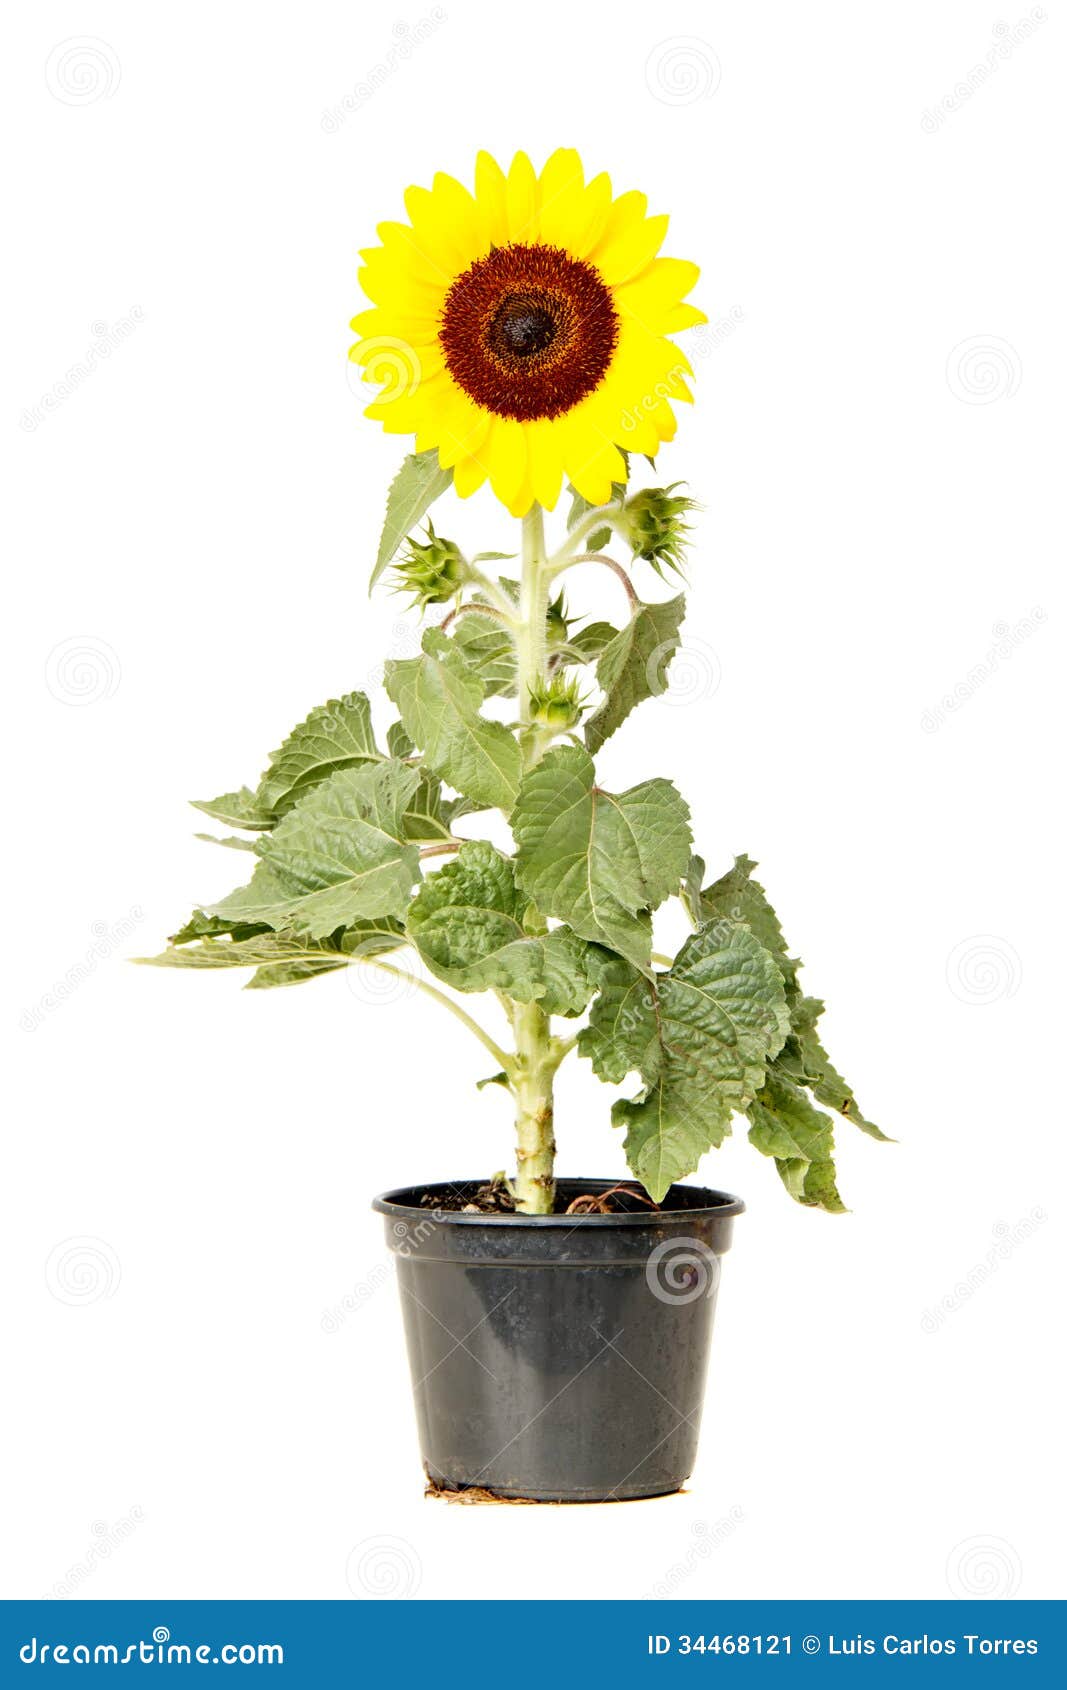 Sunflower in a black vase stock image. Image of nature - 34468121